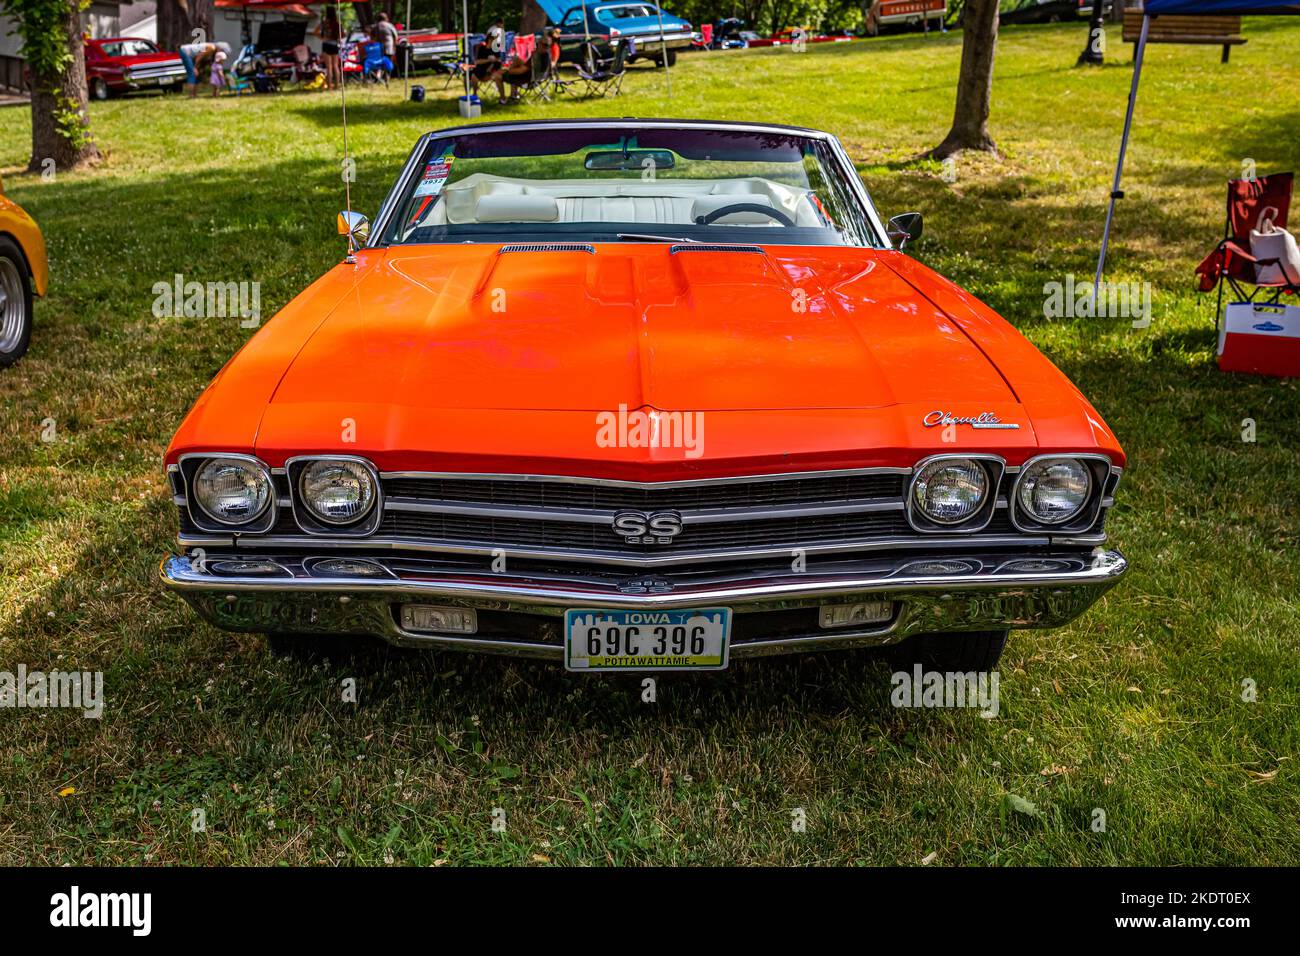 Des Moines, IA - July 02, 2022: High perspective front view of a 1969 Chevrolet Chevelle SS Convertible at a local car show. Stock Photo